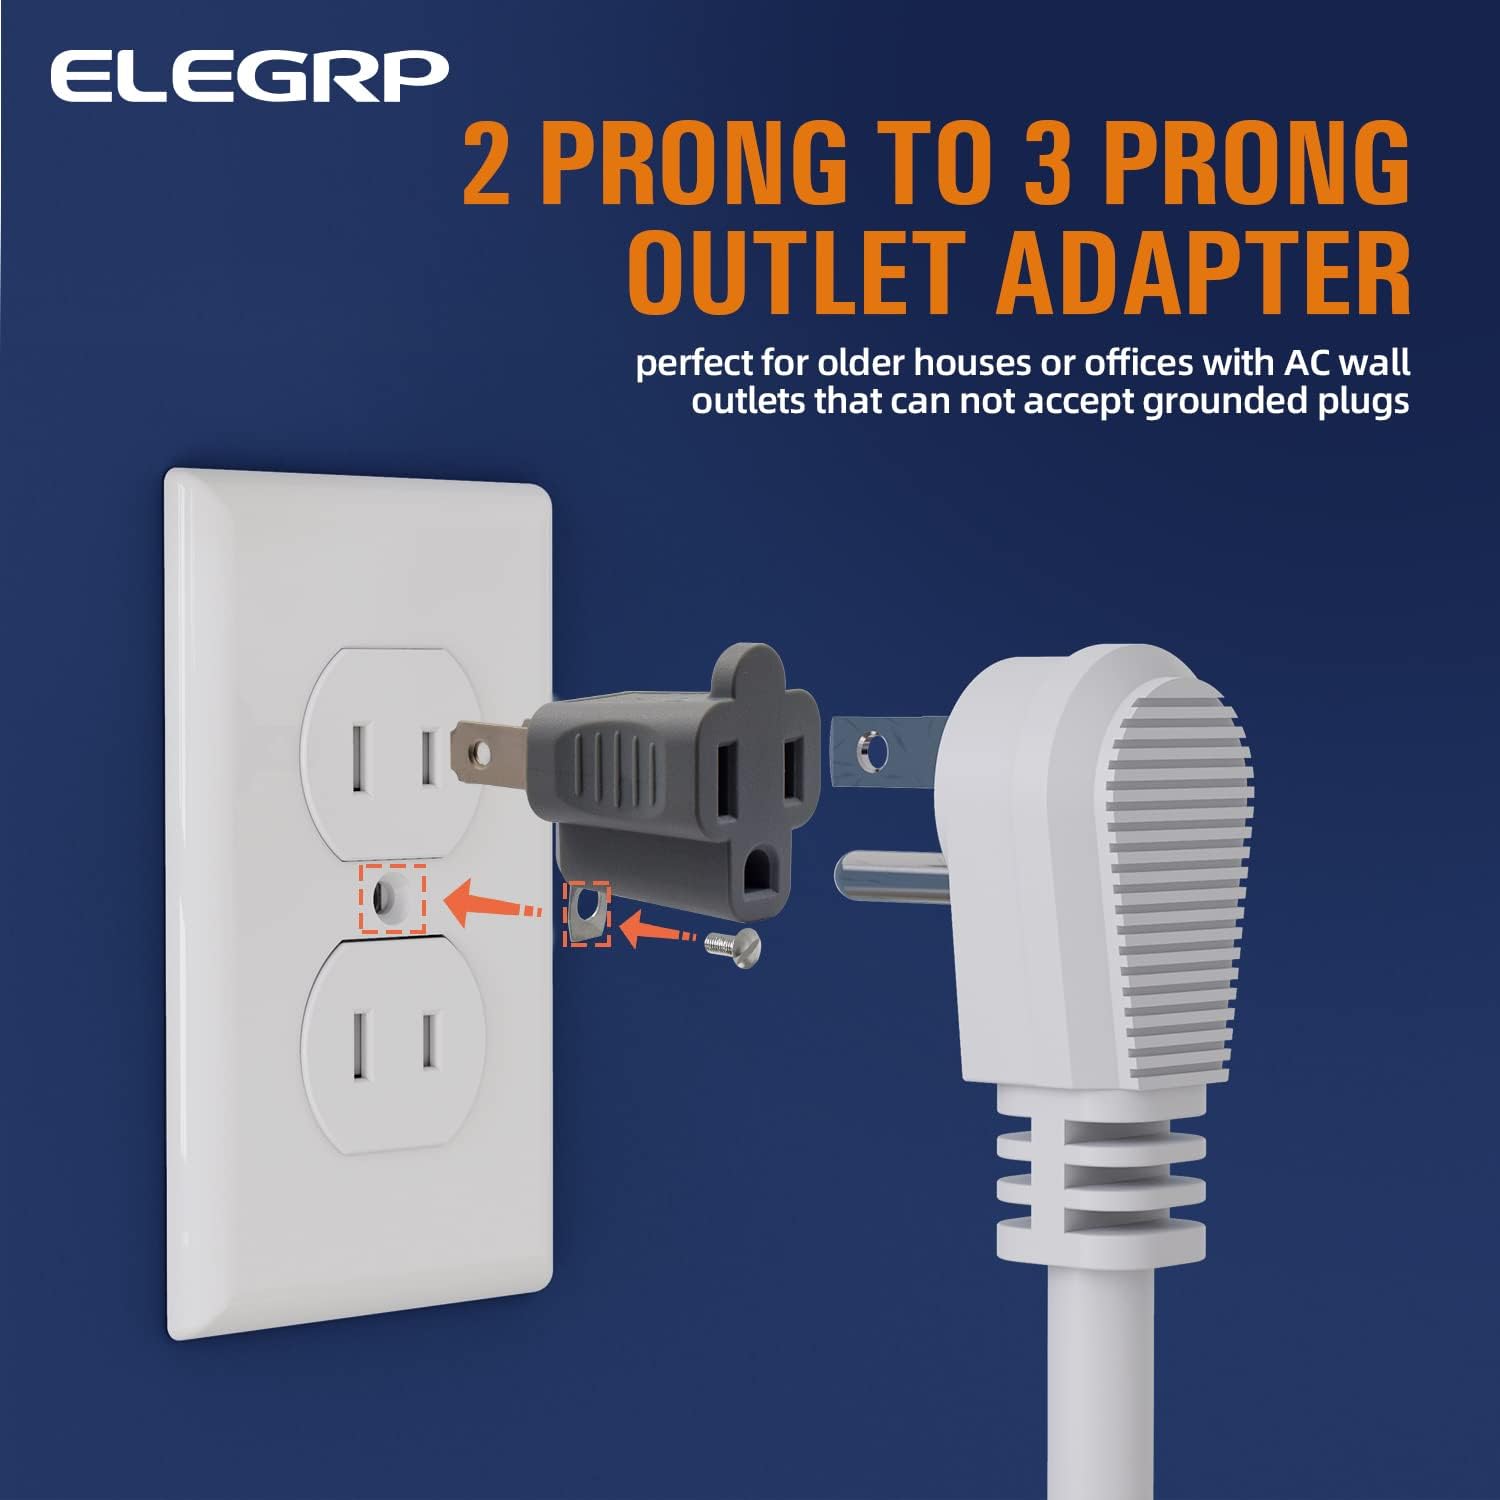 elegrp 2 to 3 Prong Grounding Adapter Outlet, 2-Prong to 3-Prong Adapter Converters for Wall Outlets Plugs, Portable Polarized Outlet